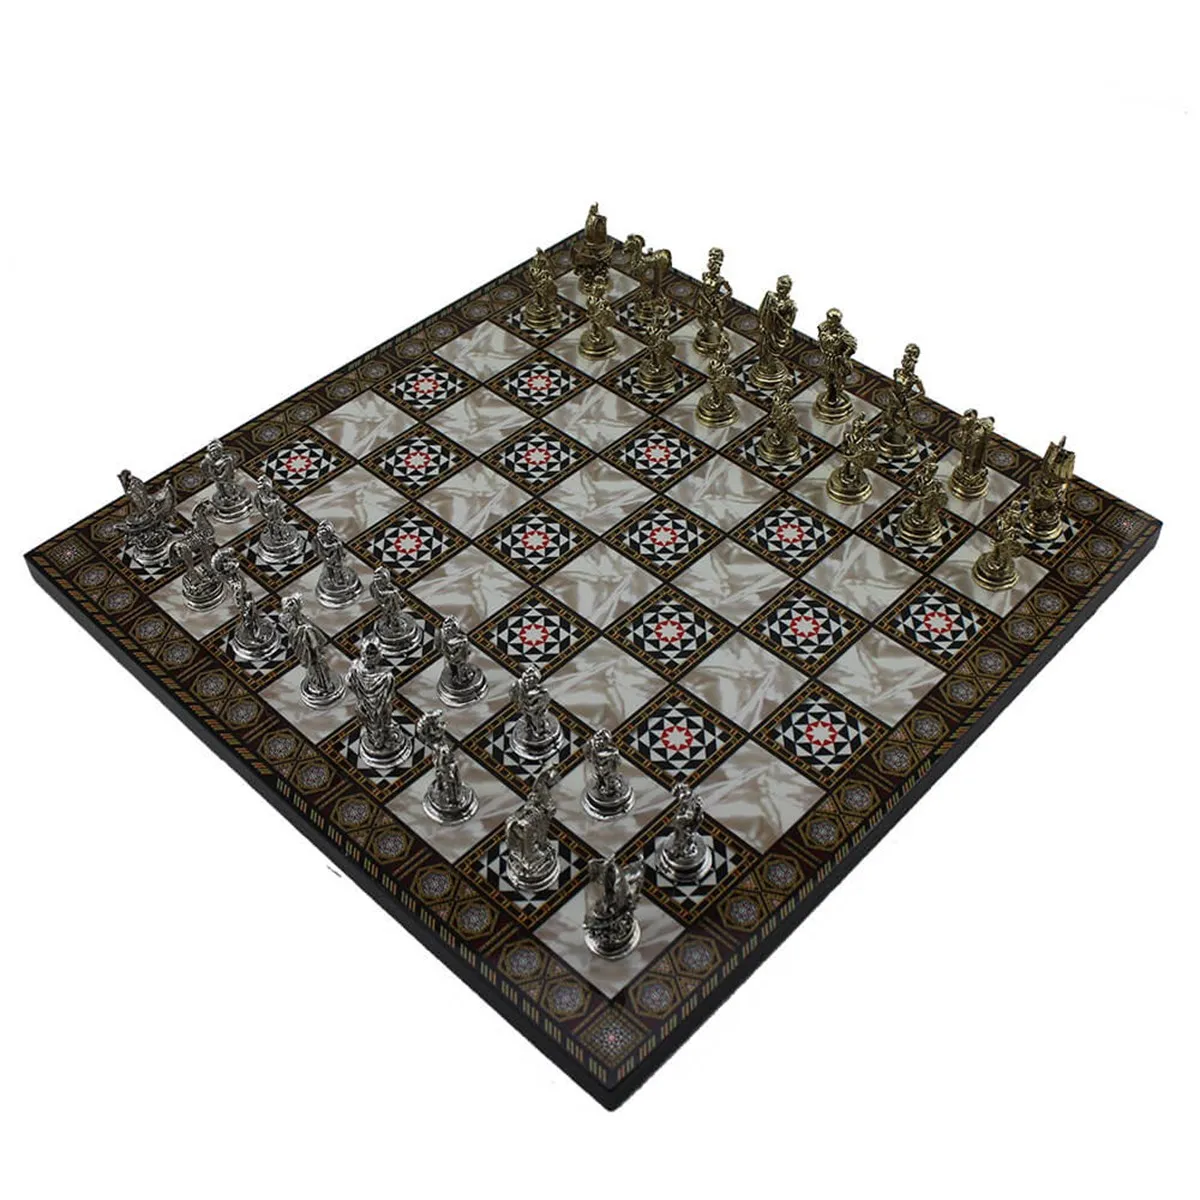 Small Size Metal Trojans Chess Set and Small Board with Nacre Pattern 30x30 cm